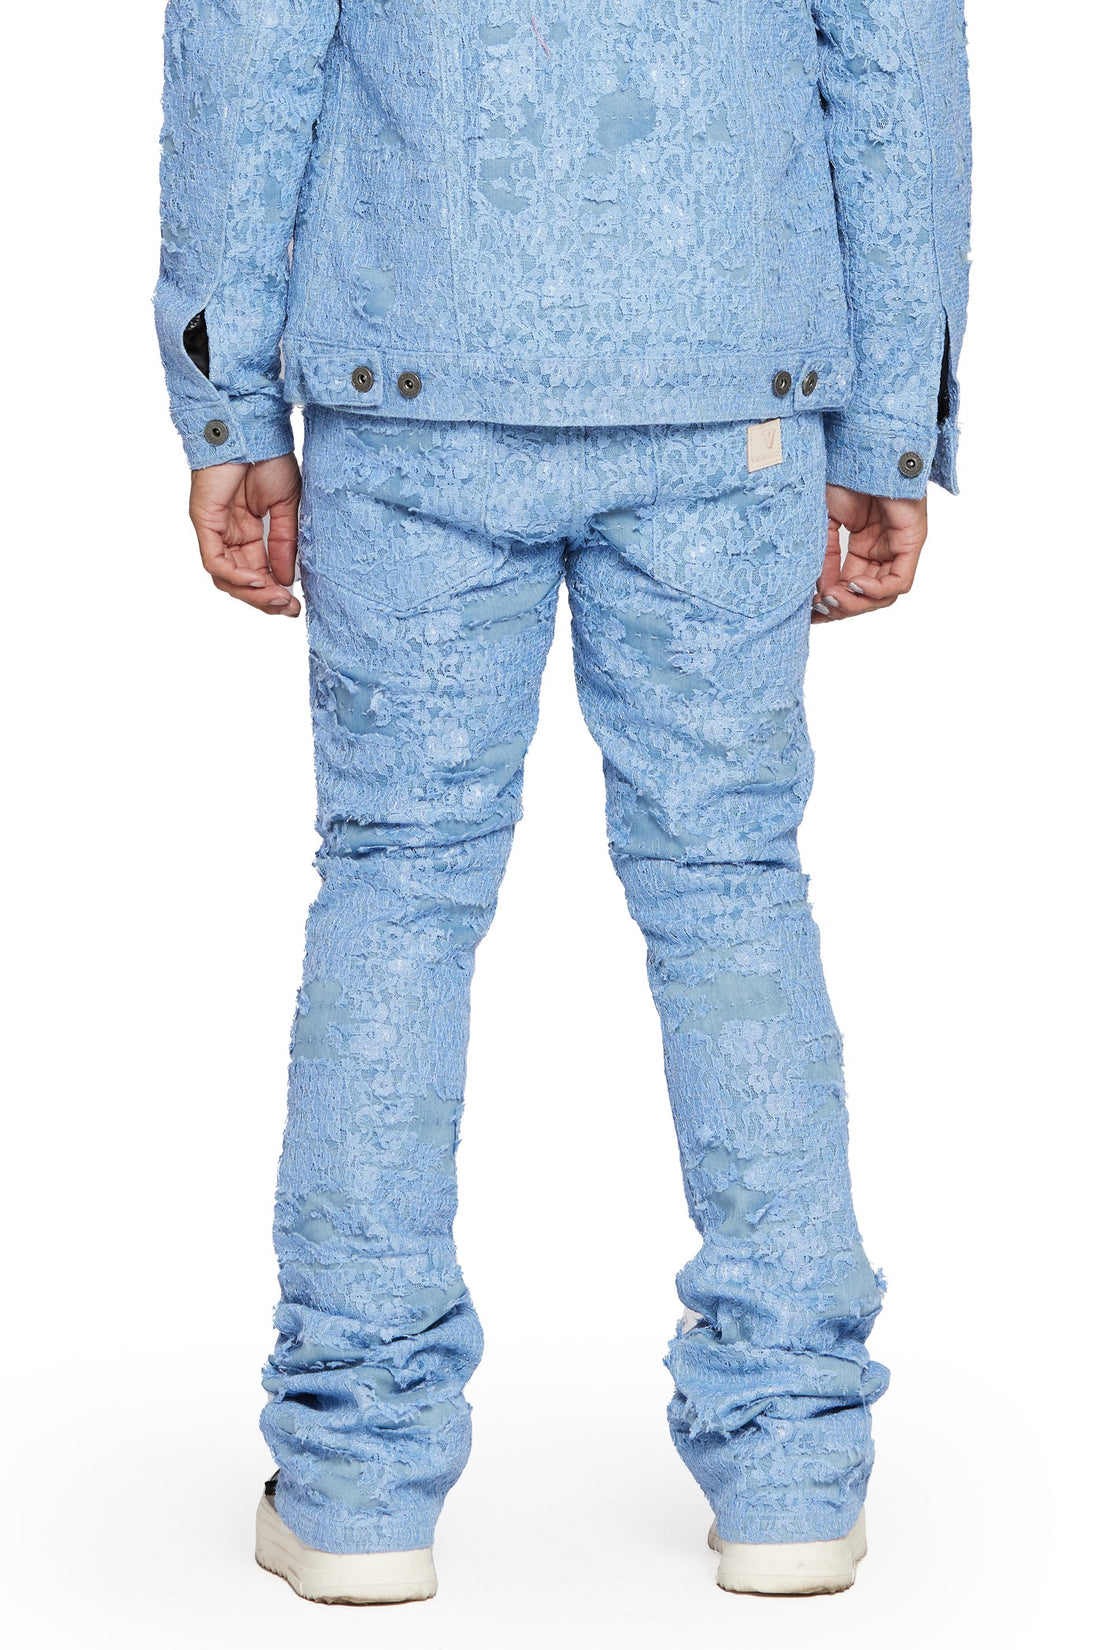 VALABASAS STACKED "BLUE MOON" LIGHT SKY Jeans